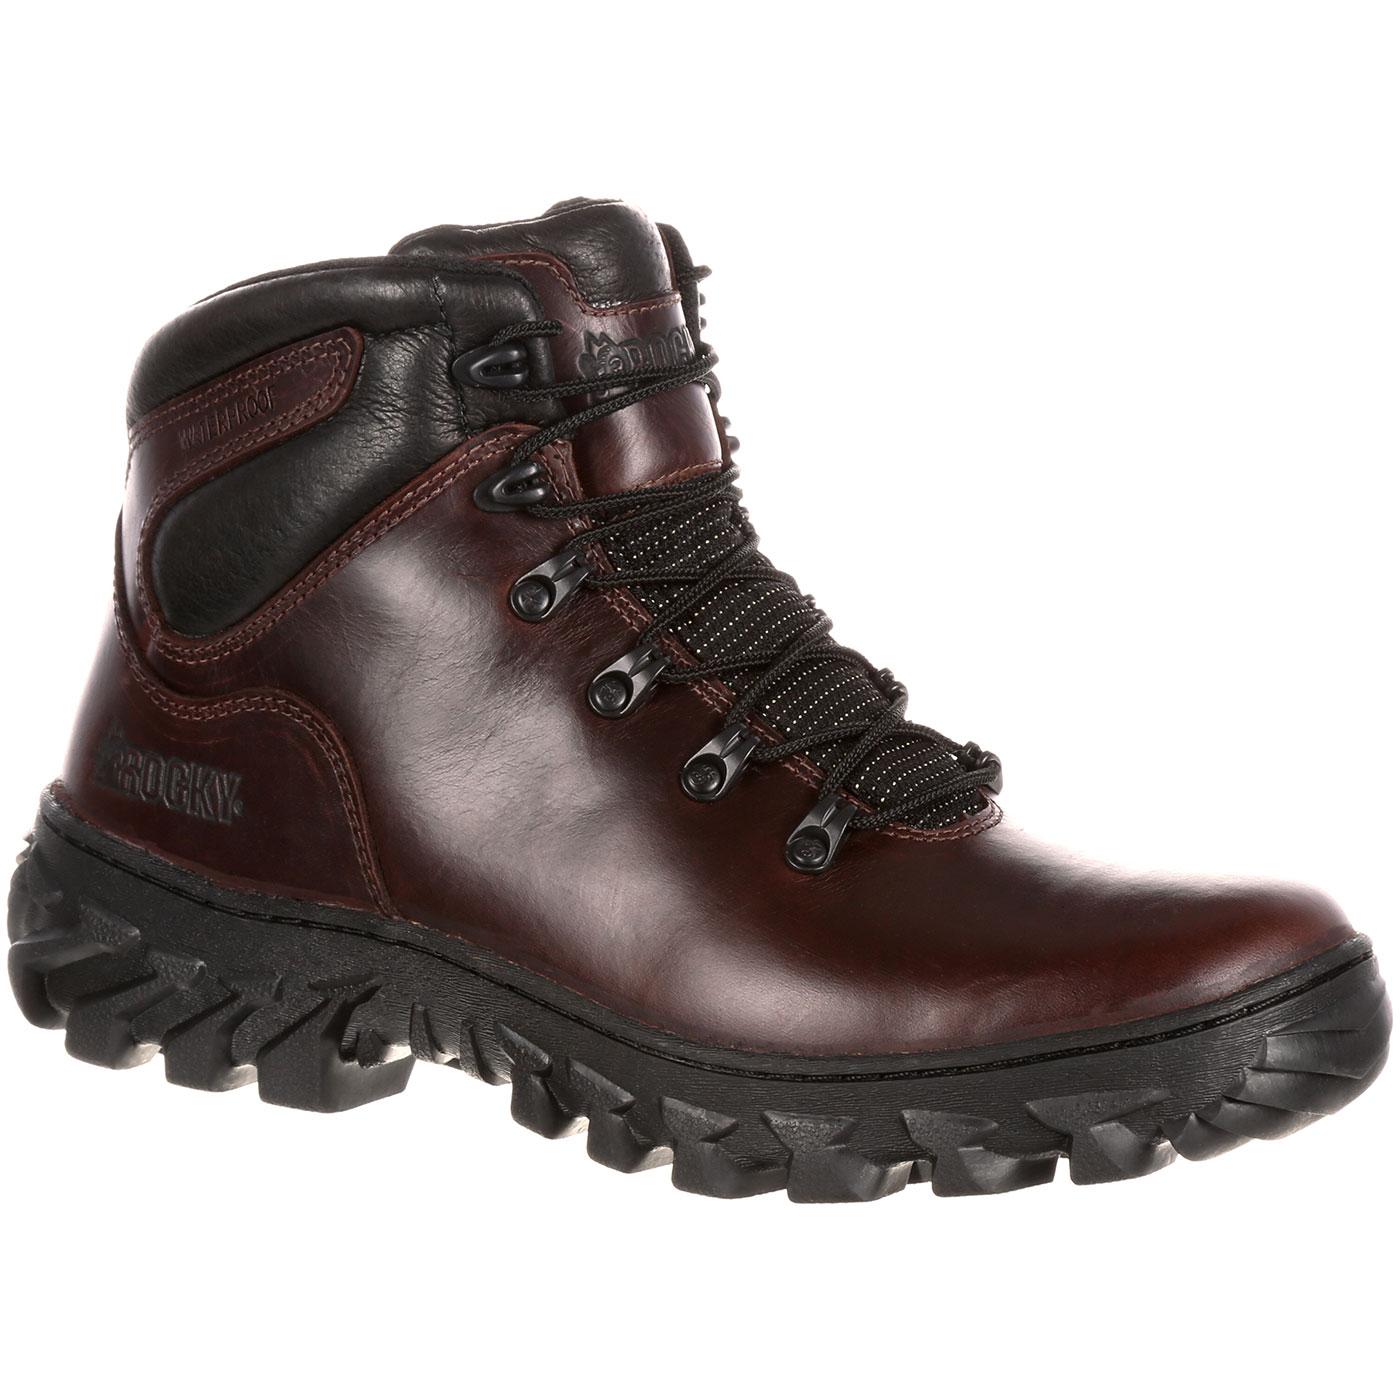 Rocky muck boots - Shop All muck boots by Rocky Boots Today